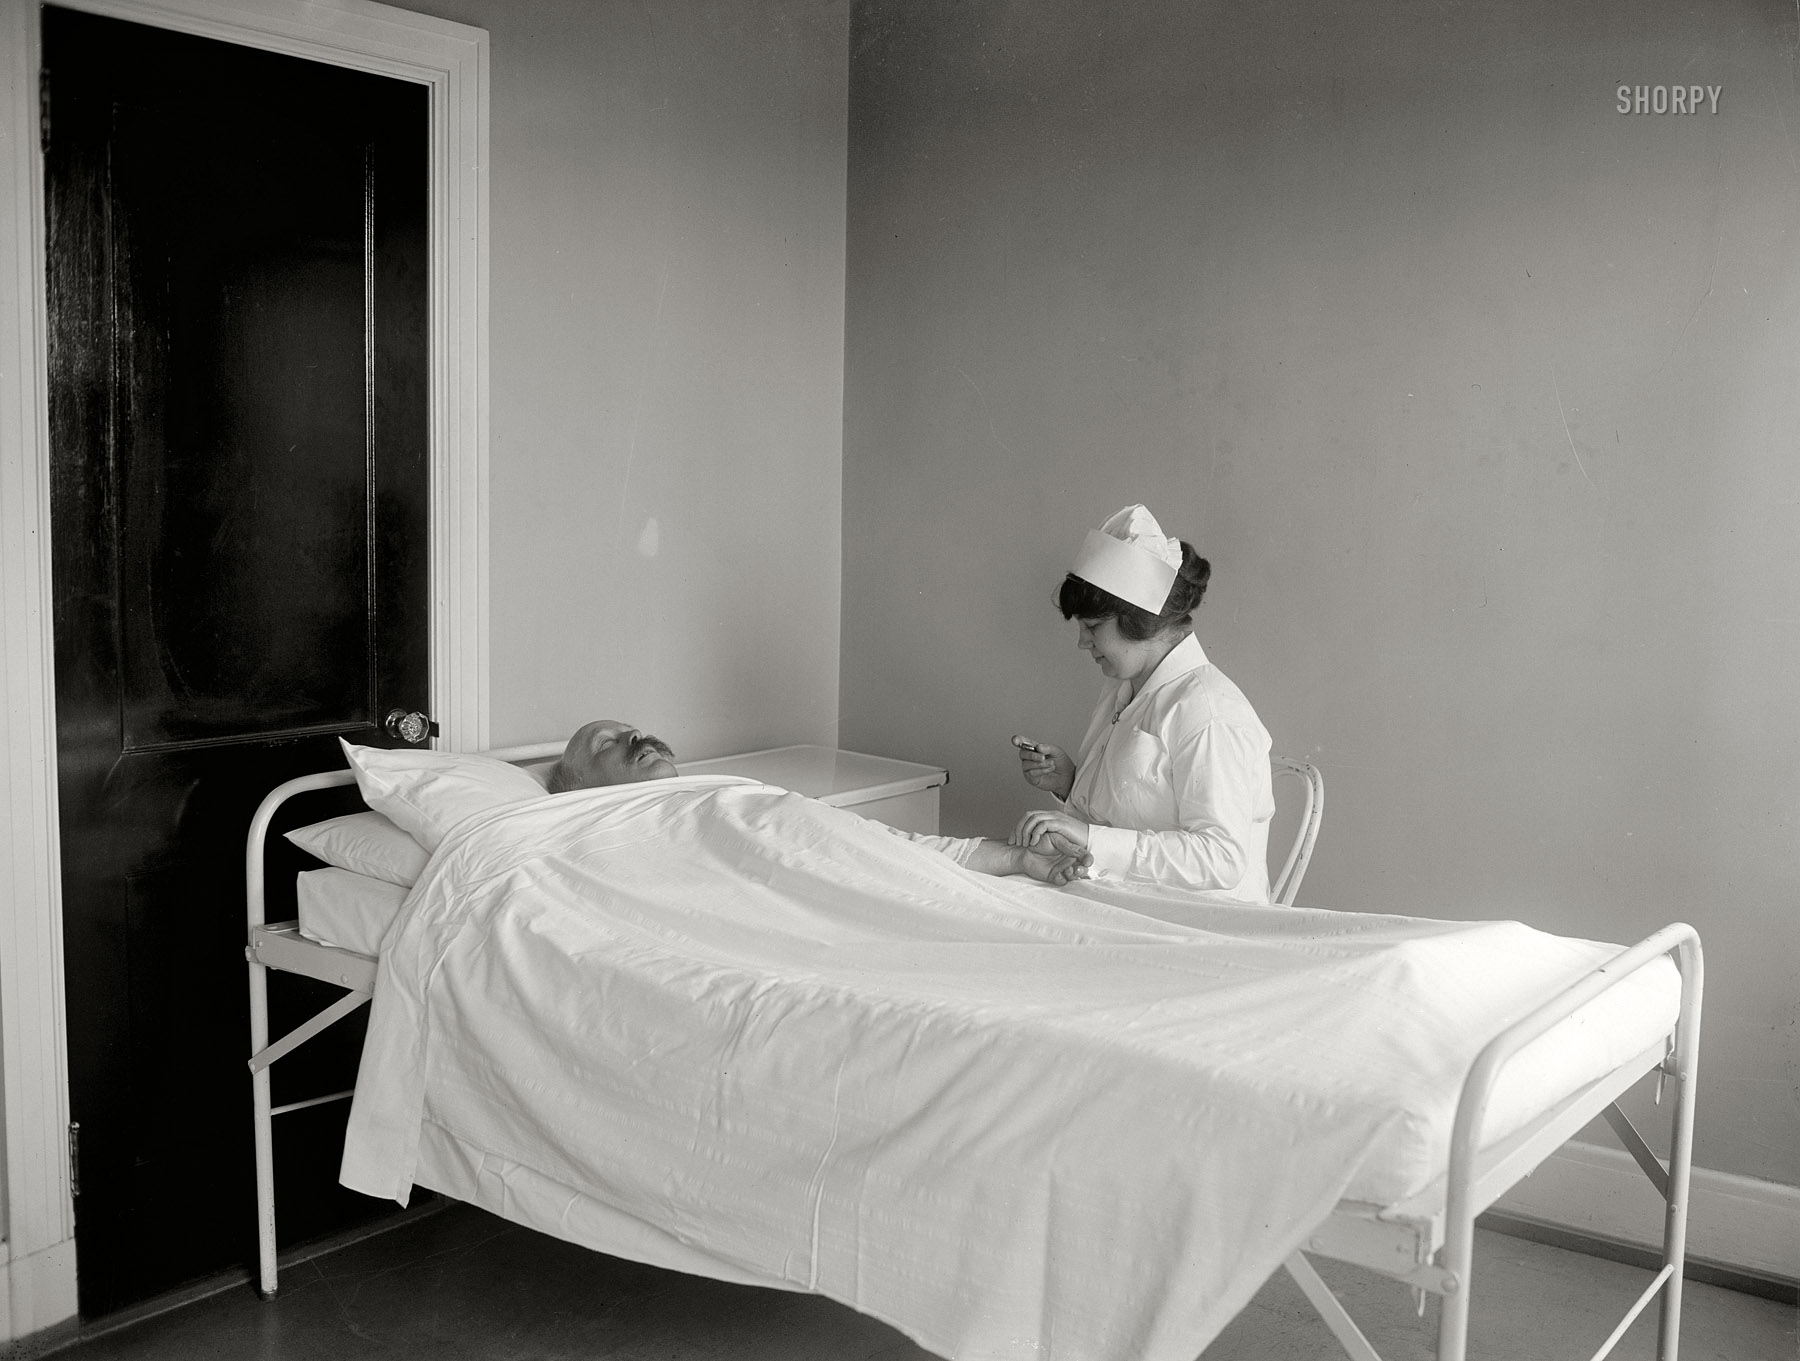 Washington, D.C., circa 1922. "Surgery." From a series of photos depicting pre- and postoperative procedures, as well as surgery itself, at an unnamed hospital. National Photo Company Collection glass negative. View full size.